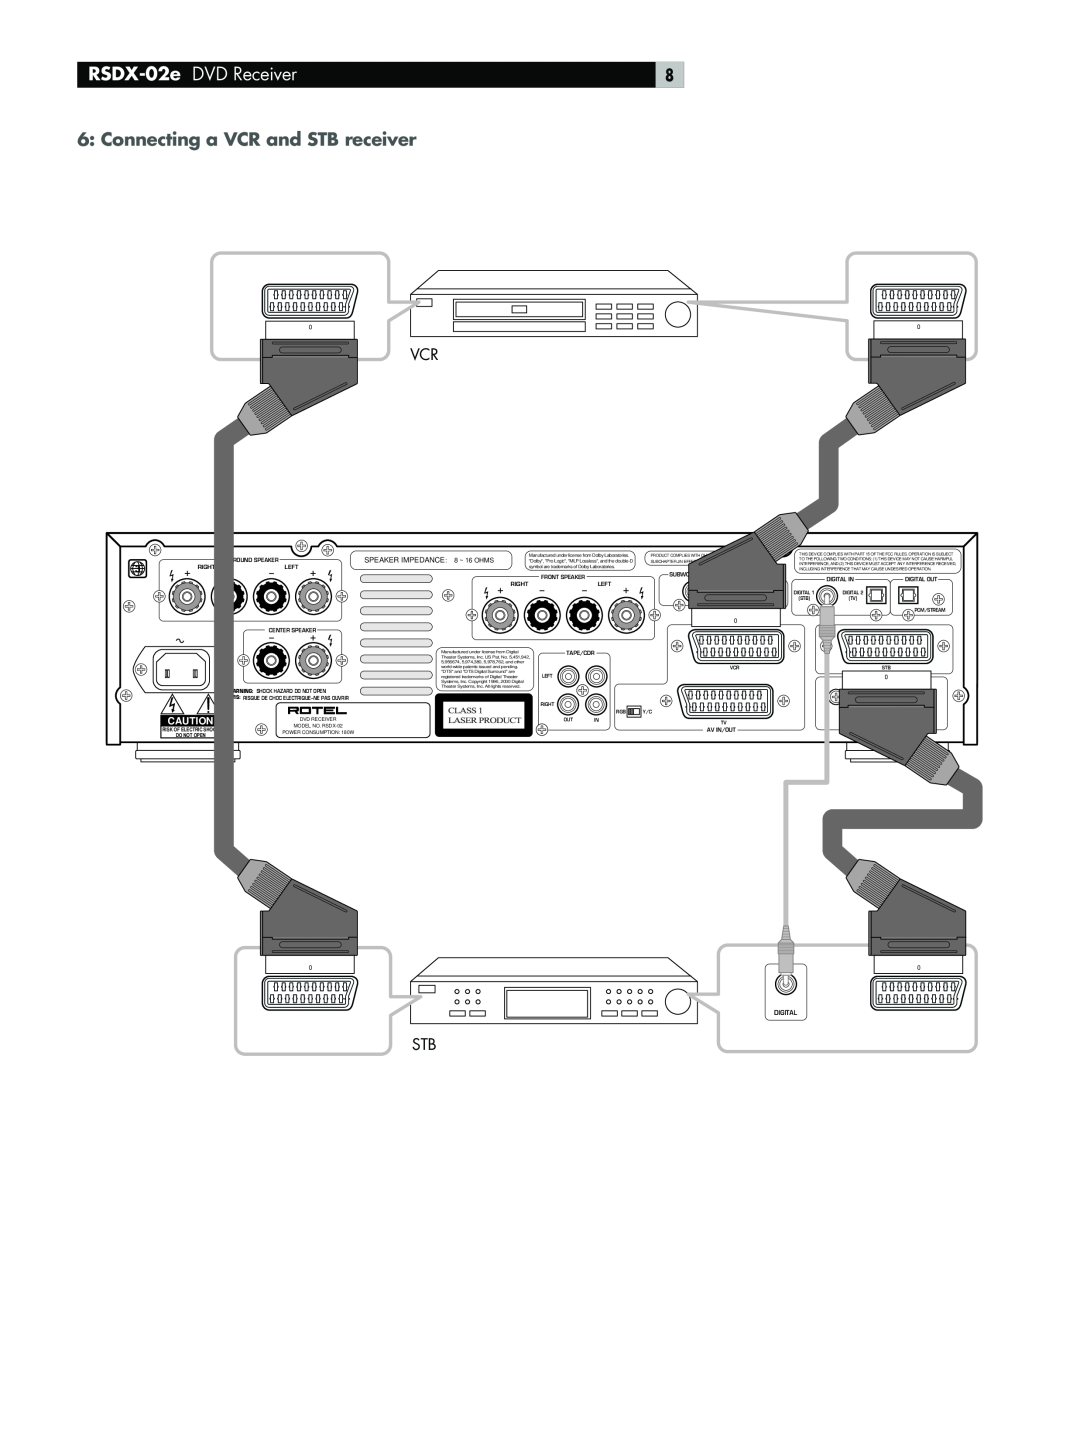 Rotel owner manual Connecting a VCR and STB receiver, RSDX-02e DVD Receiver, SPEAKER IMPEDANCE 8 ~ 16 OHMS, Digital 